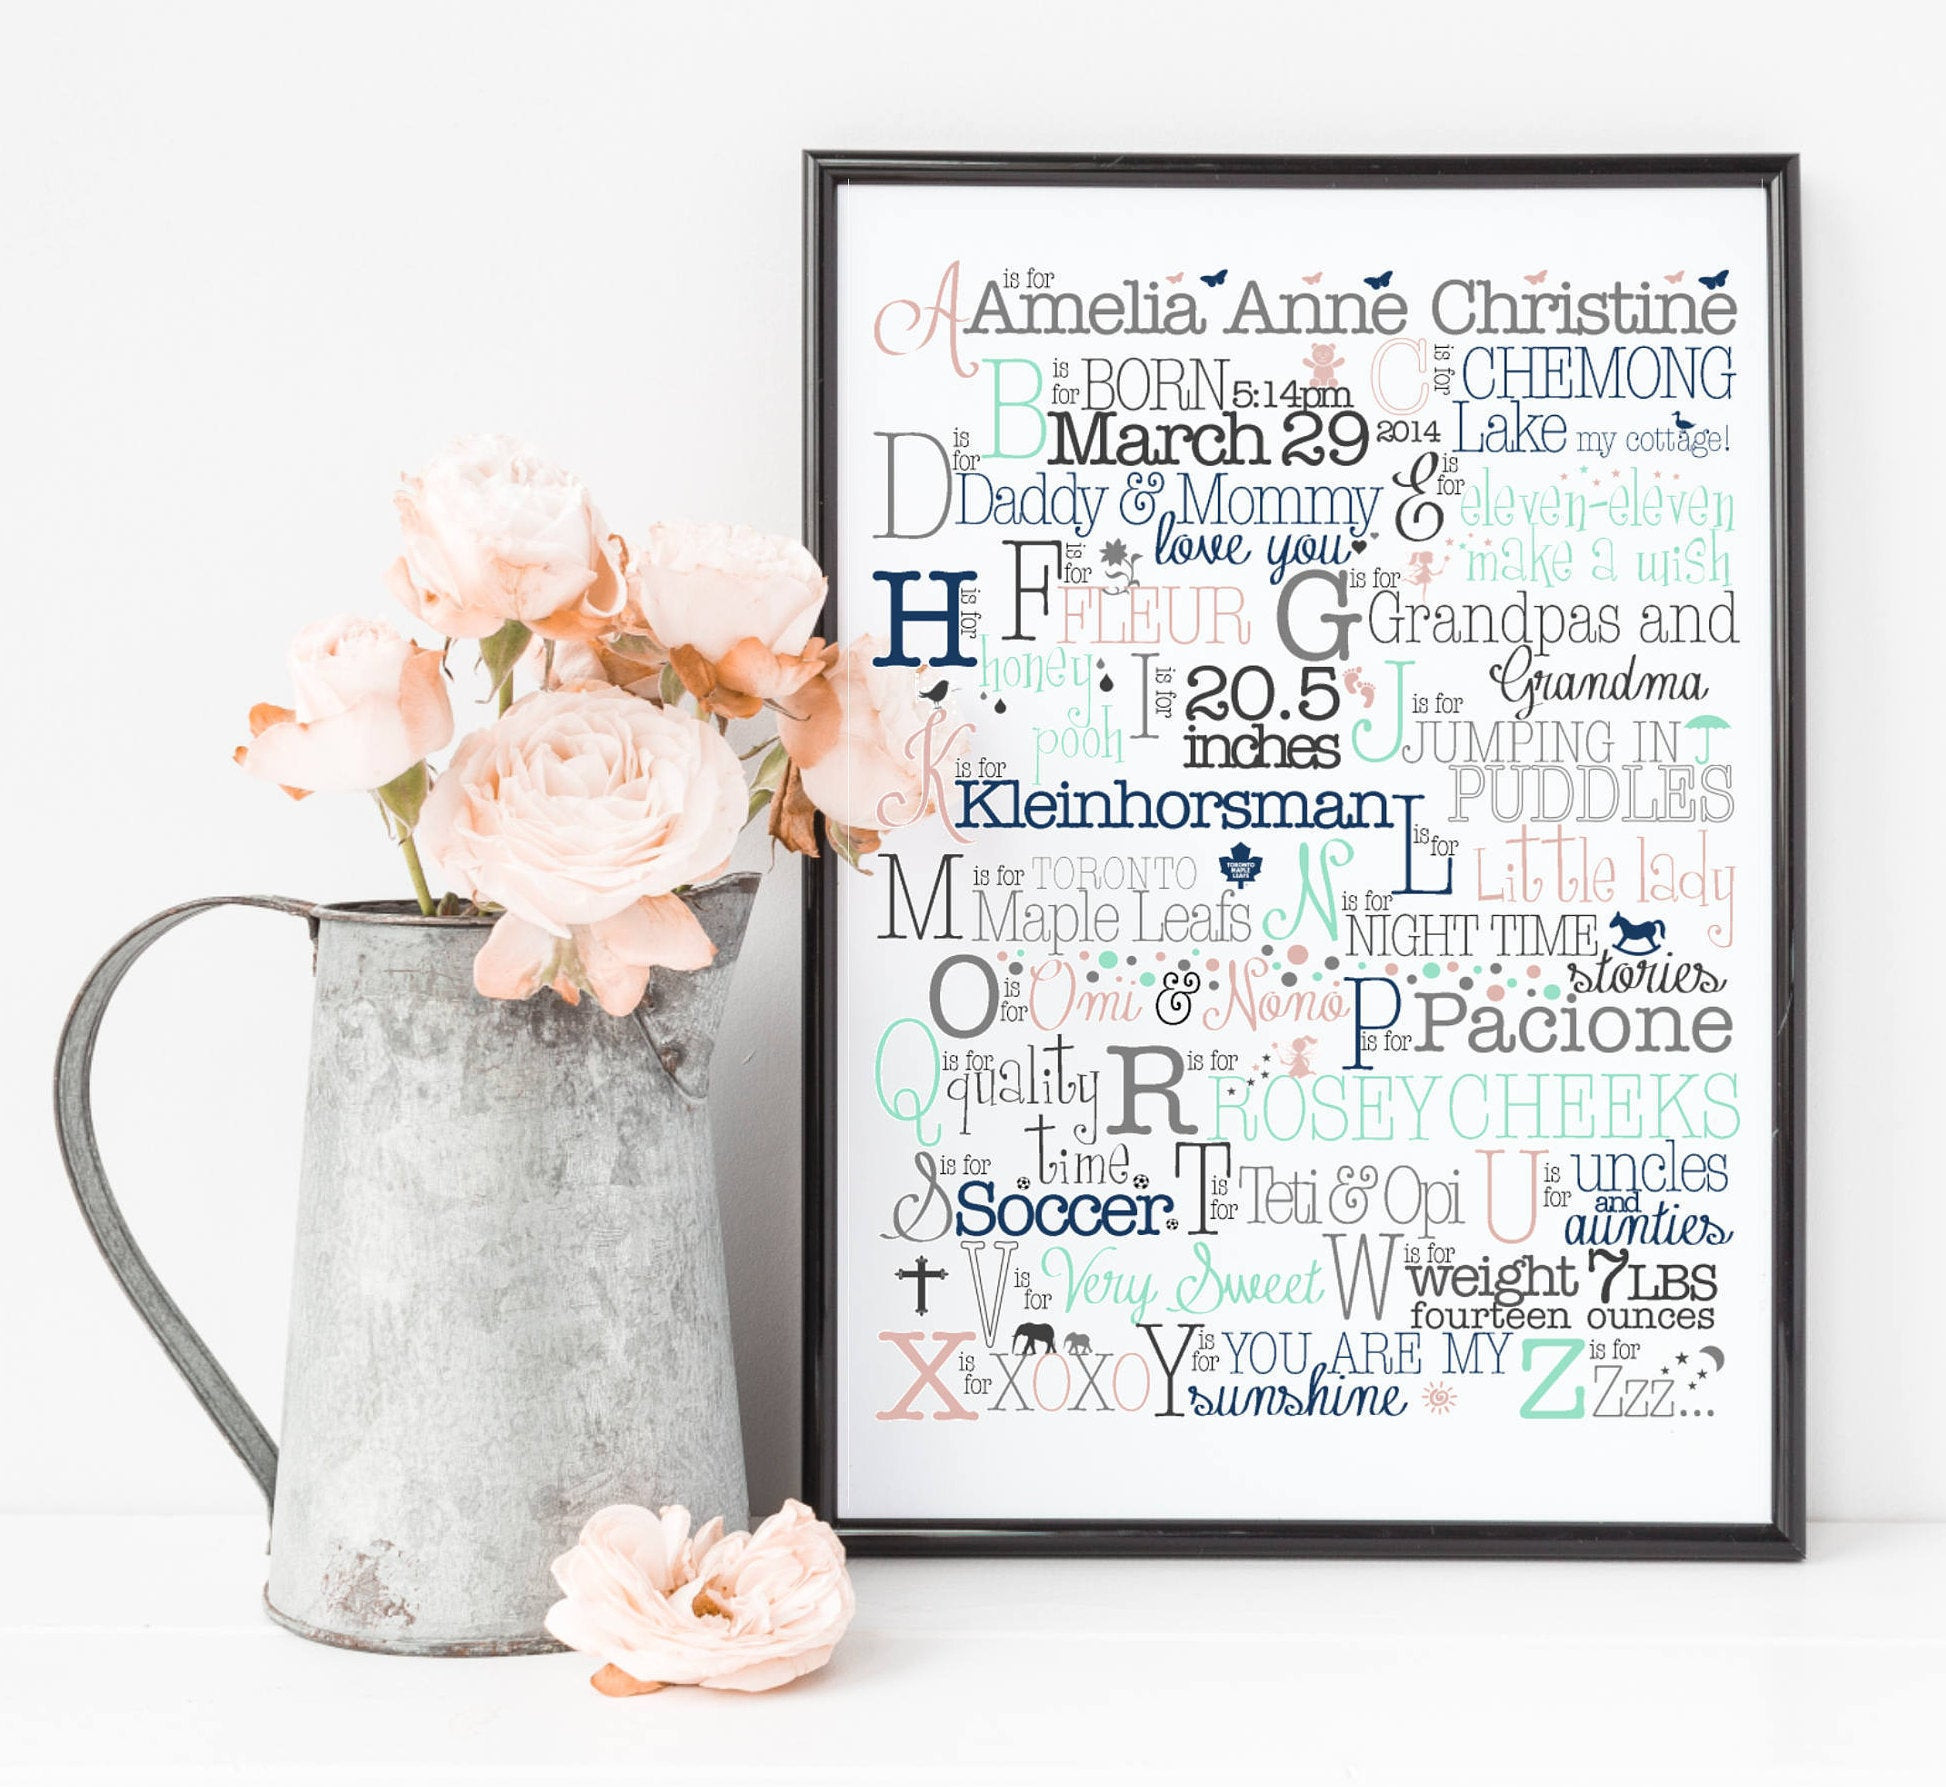 Personalized Baby Gift Etsy
 Personalized Baby Gift Baby Girl Gift Nursery Print Birth